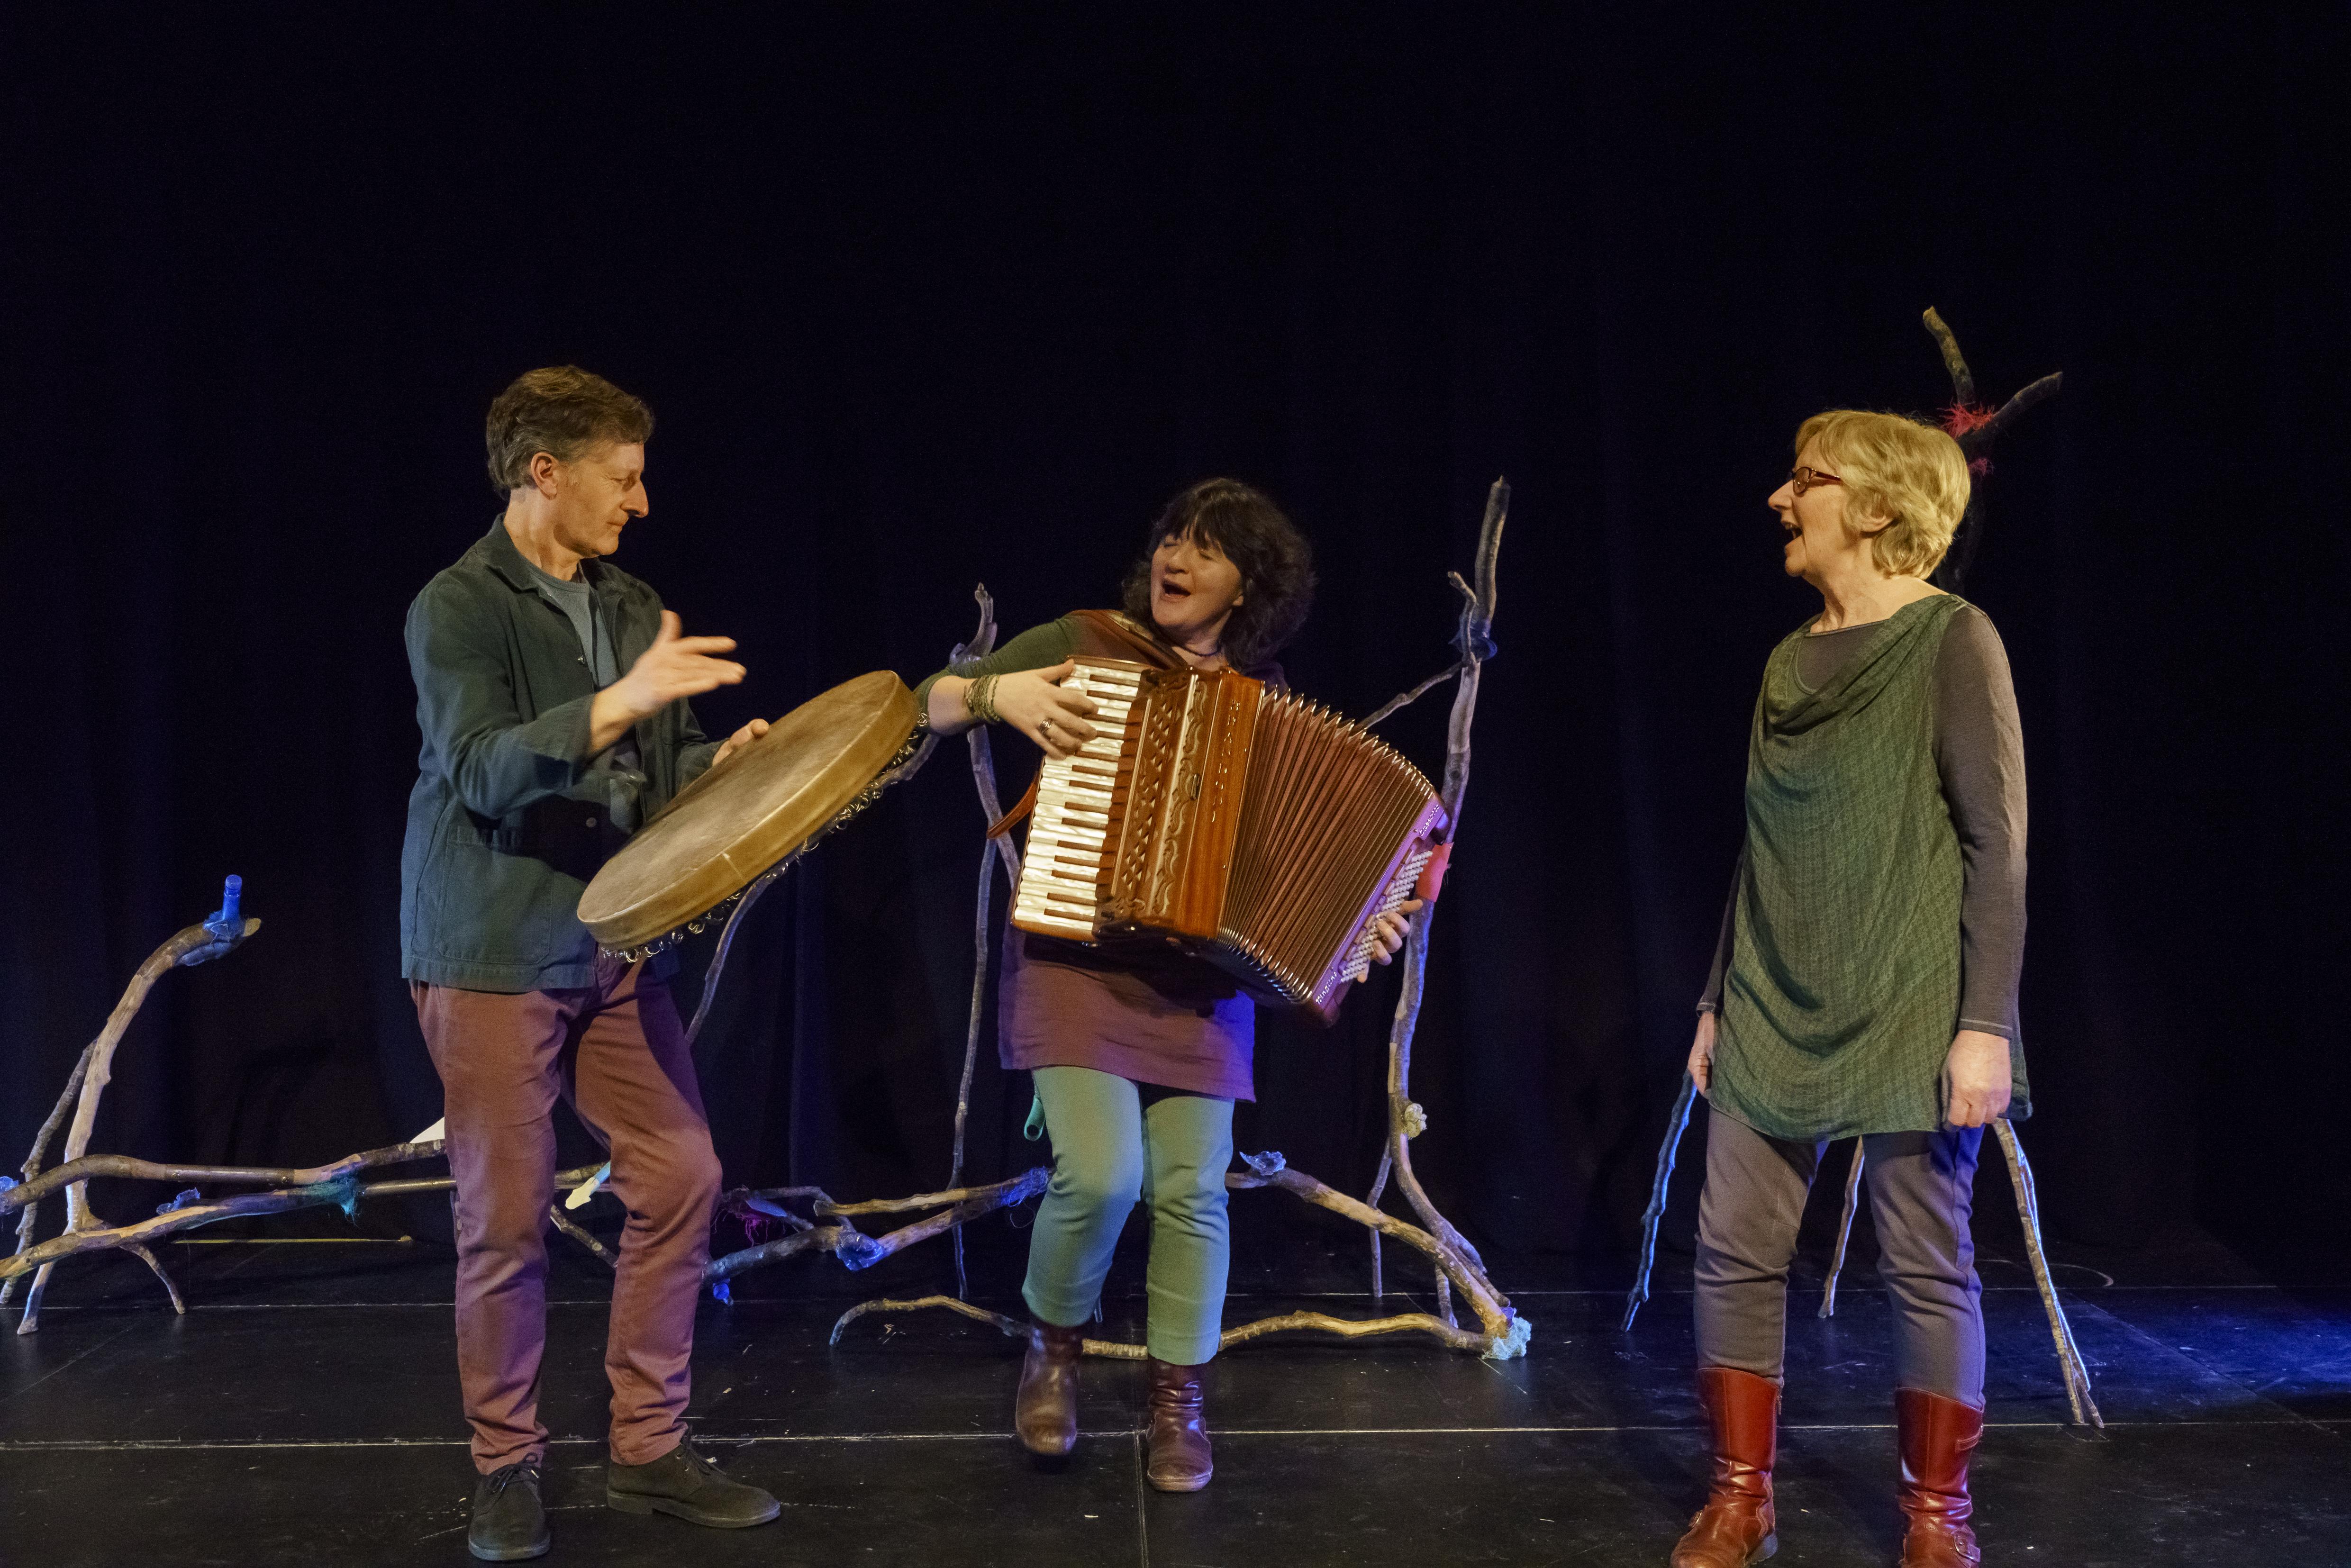 three artists on stage, (l-r) Michael Harvey plays the bodhran, Stacey Blythe plays the accordion and Lynne Denman sings